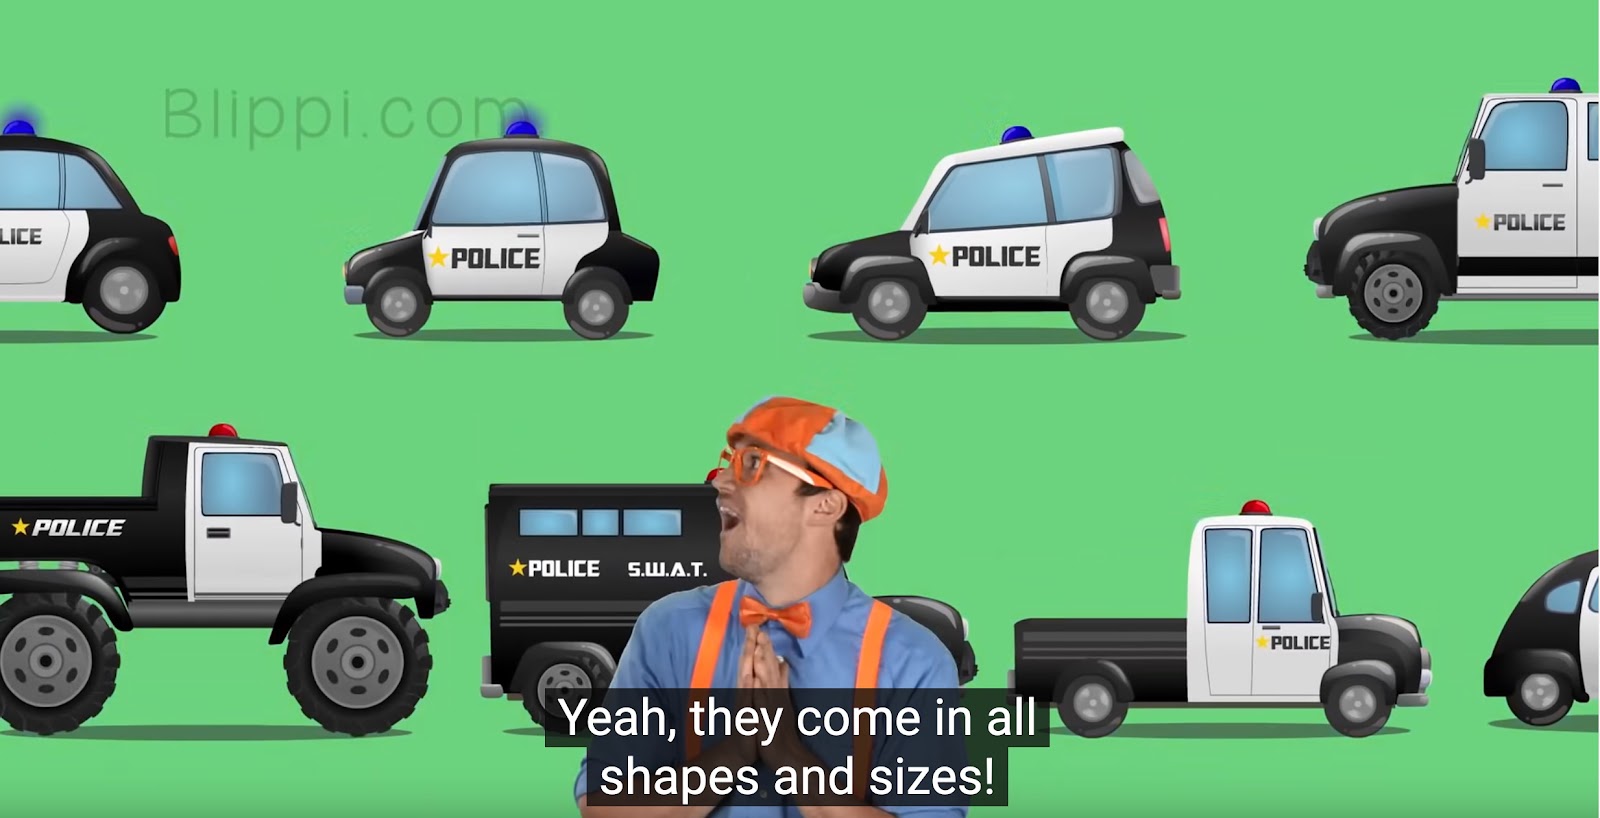 The Dead World Of Blippi ❧ Current Affairs